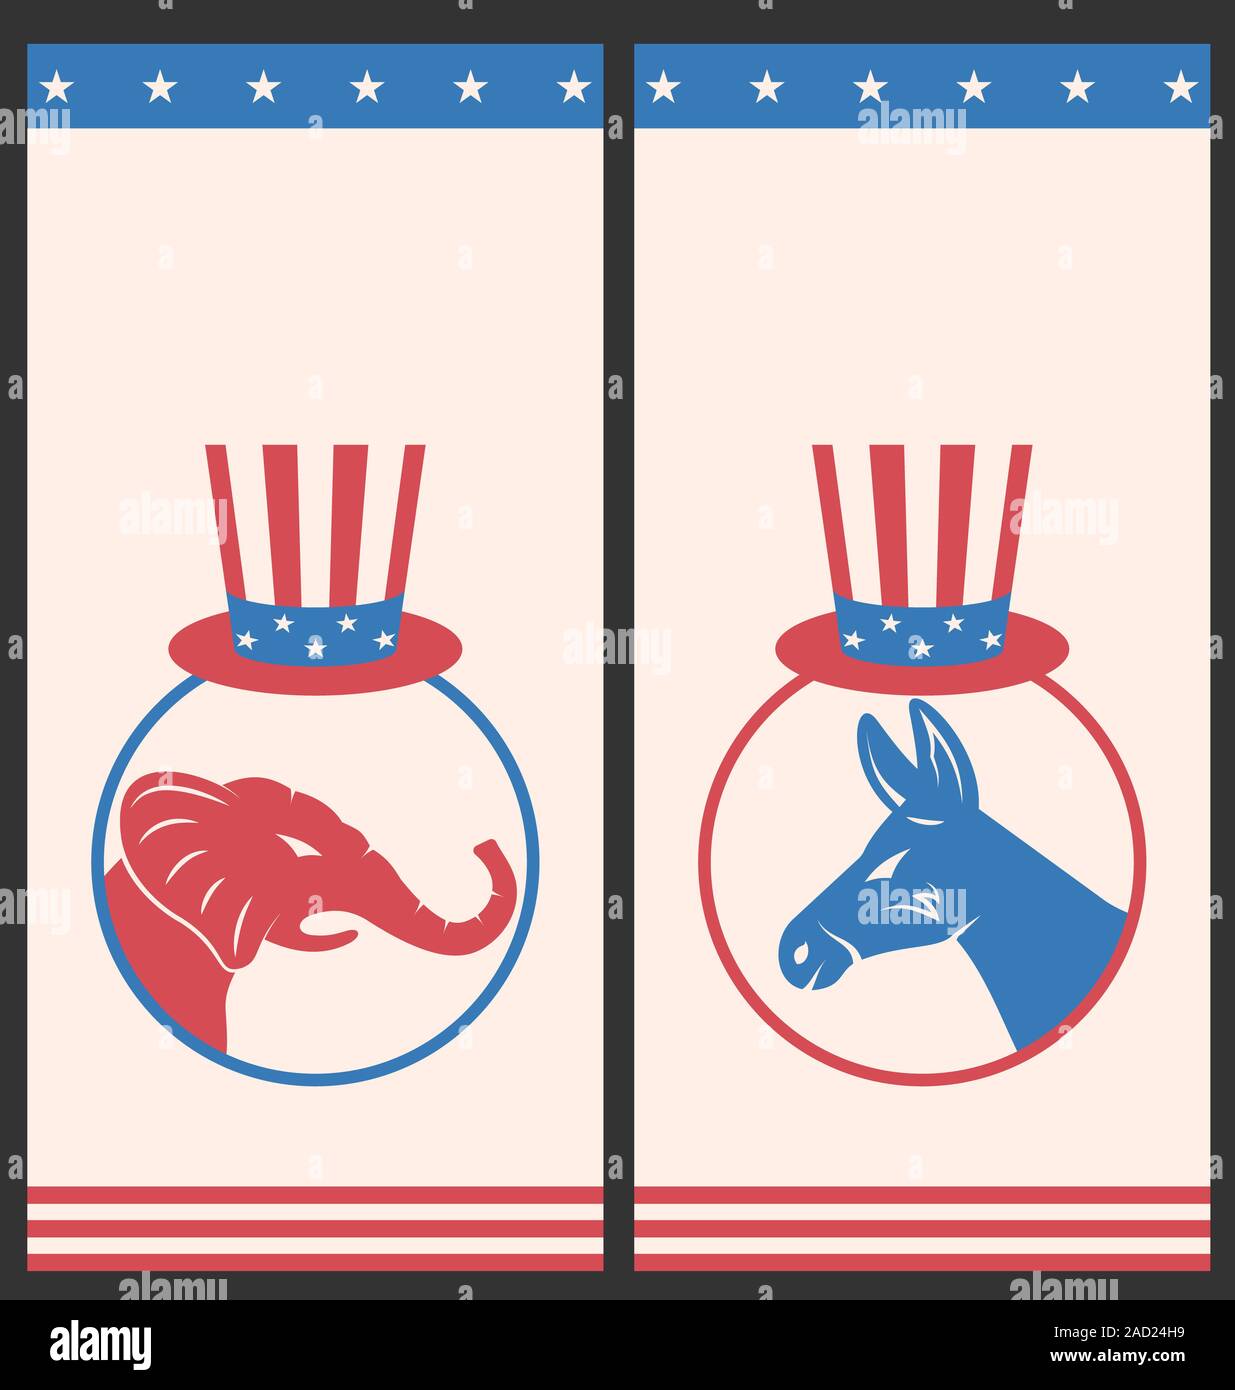 Banners for Advertise of United States Political Parties Stock Photo